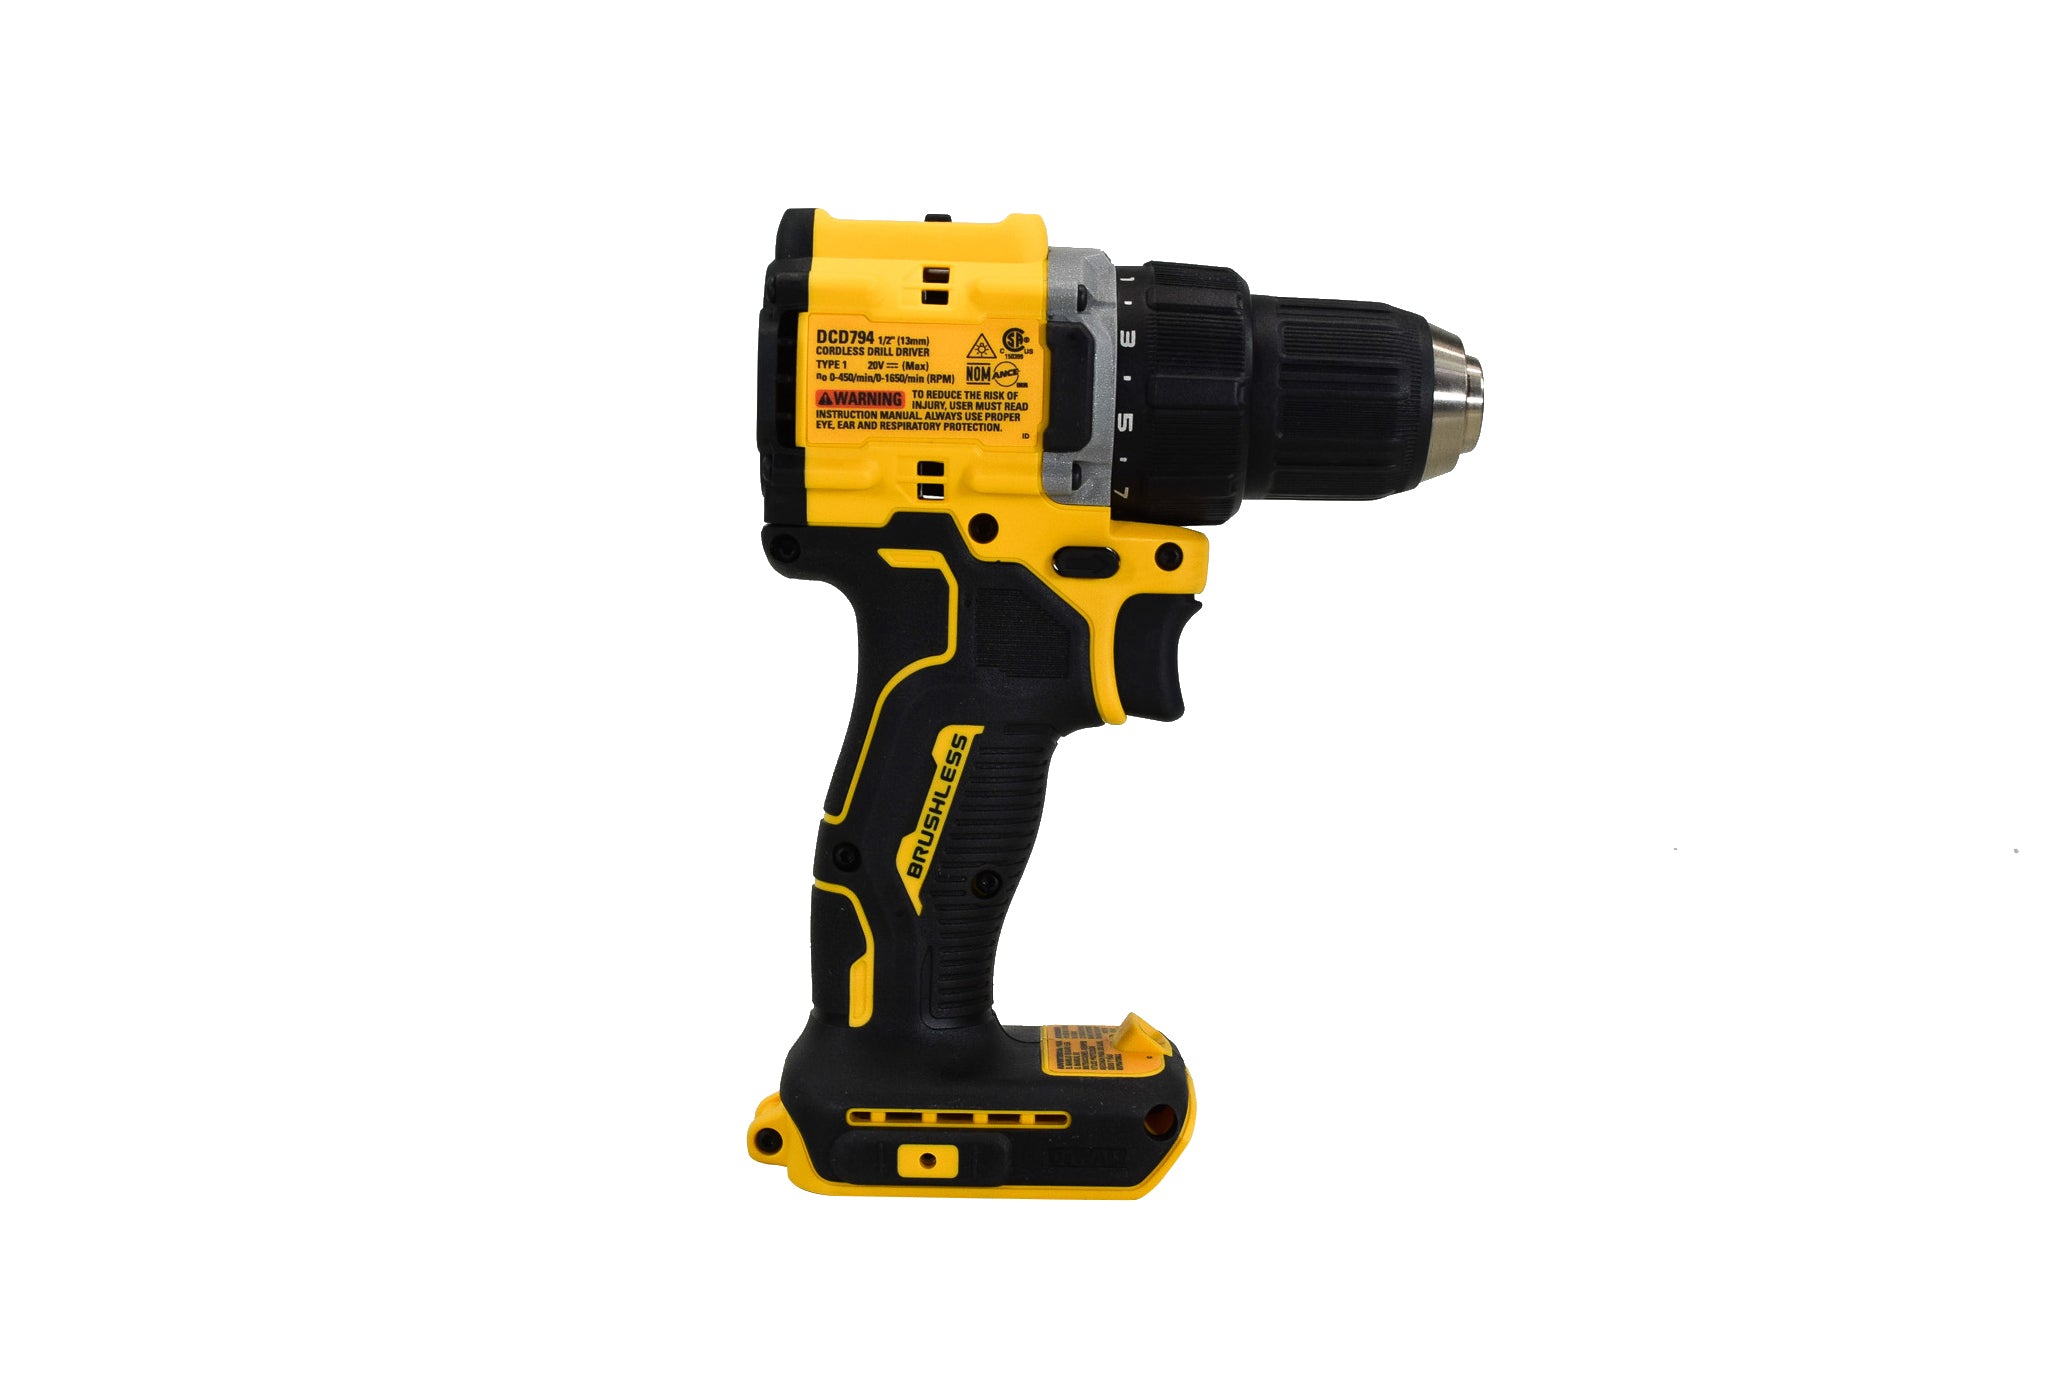 DeWalt DCD794B ATOMIC COMPACT SERIES 20V MAX* Brushless Cordless 1/2 in. Drill/Driver